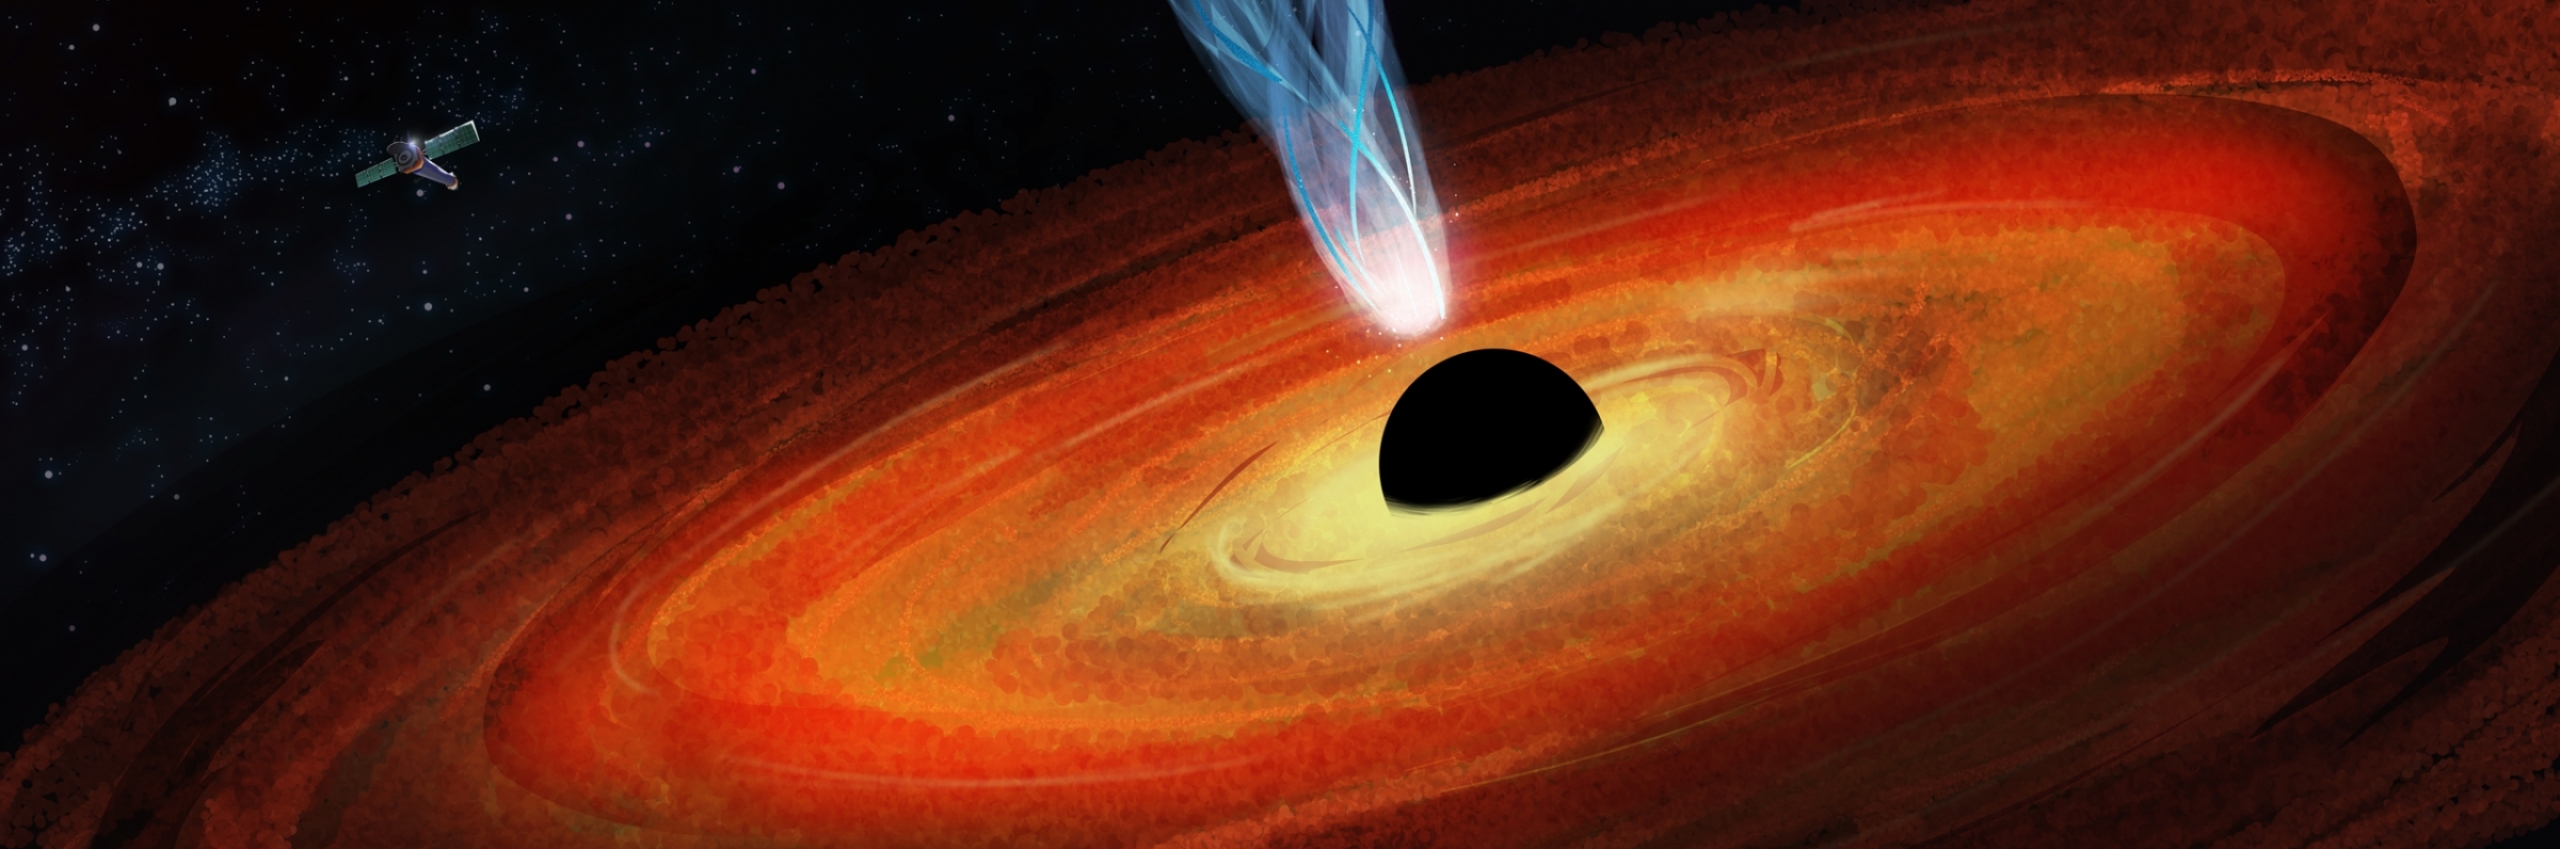 Illustration of a black hole with Chandra x-ray observatory circling nearby.